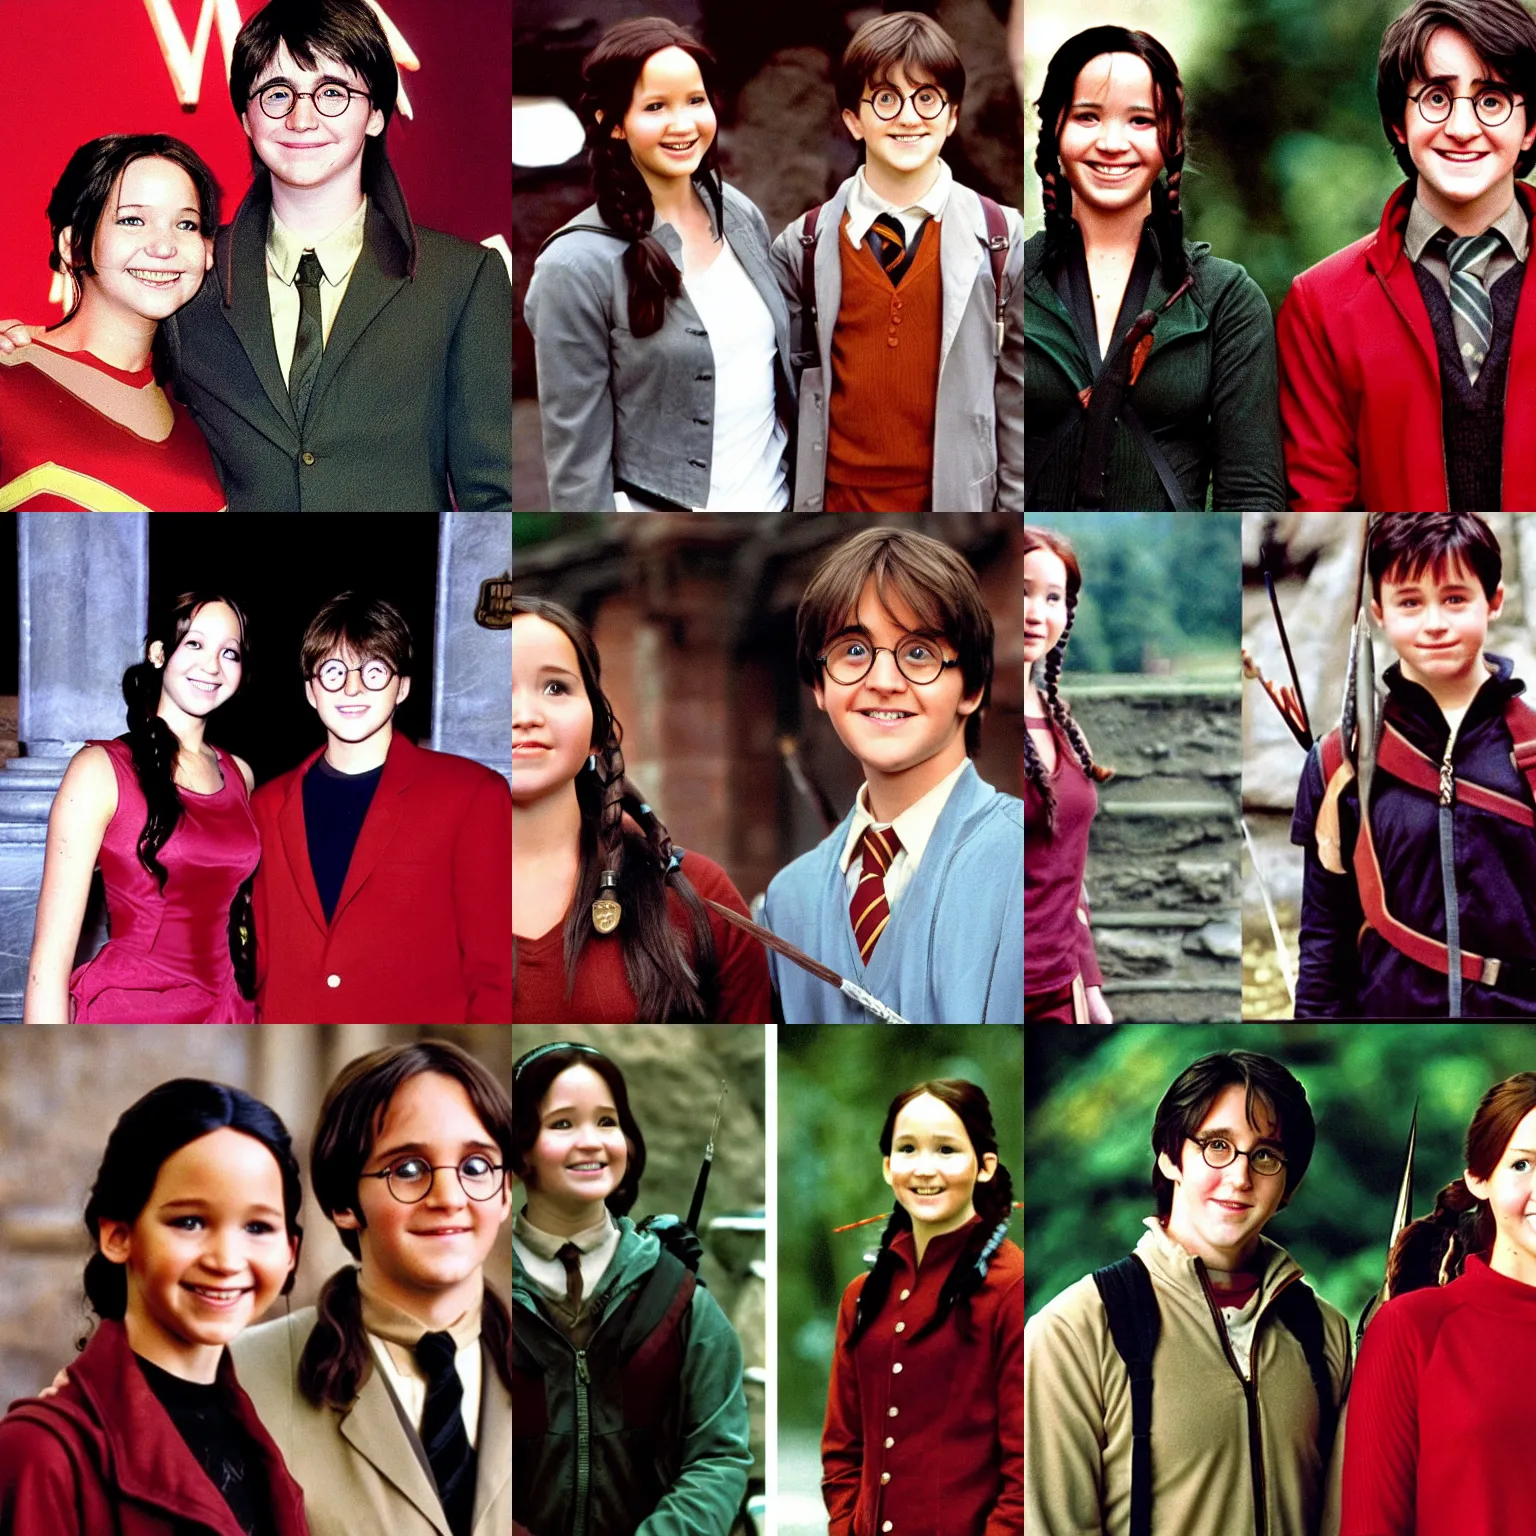 Prompt: Katniss Everdeen standing next to Harry Potter (Harry Potter and the Philosopher's Stone, 2001), both smiling for the camera